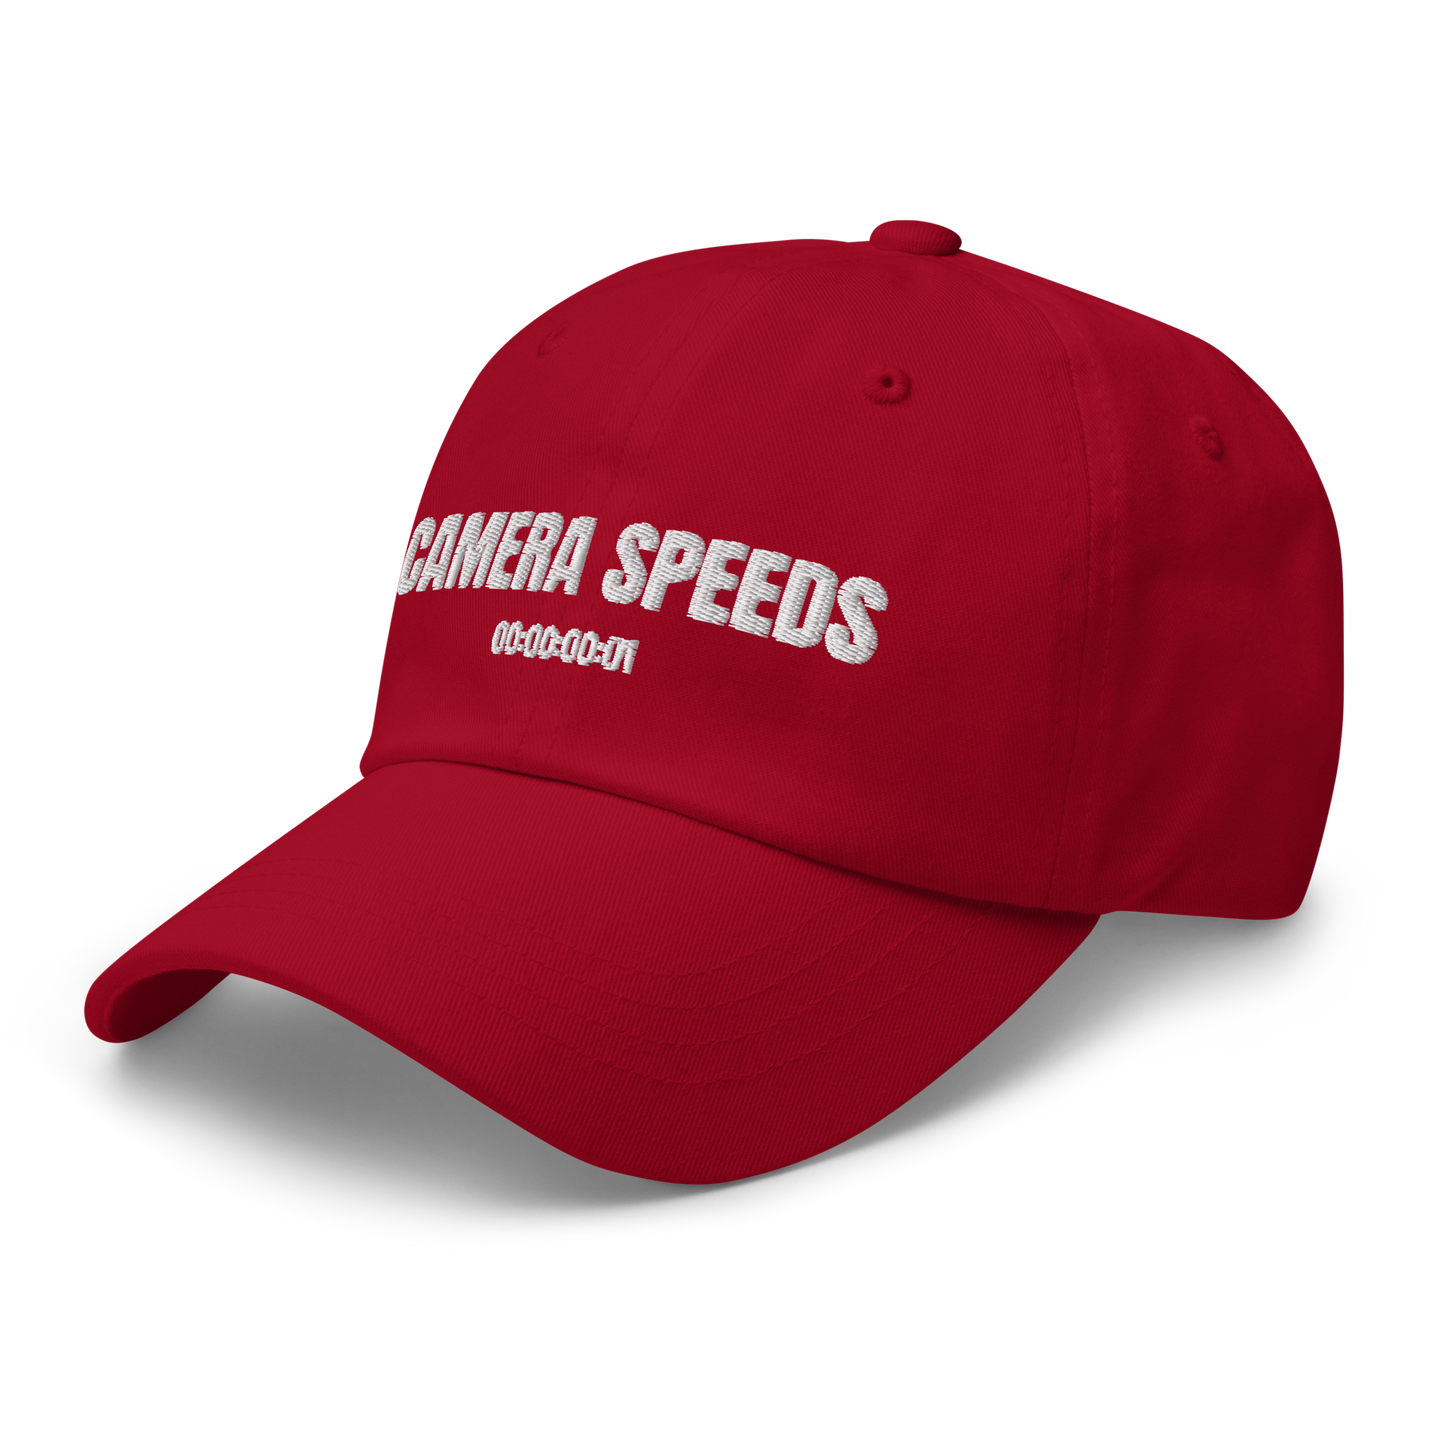 Camera Speeds Classic Dad Hat (Variant A)